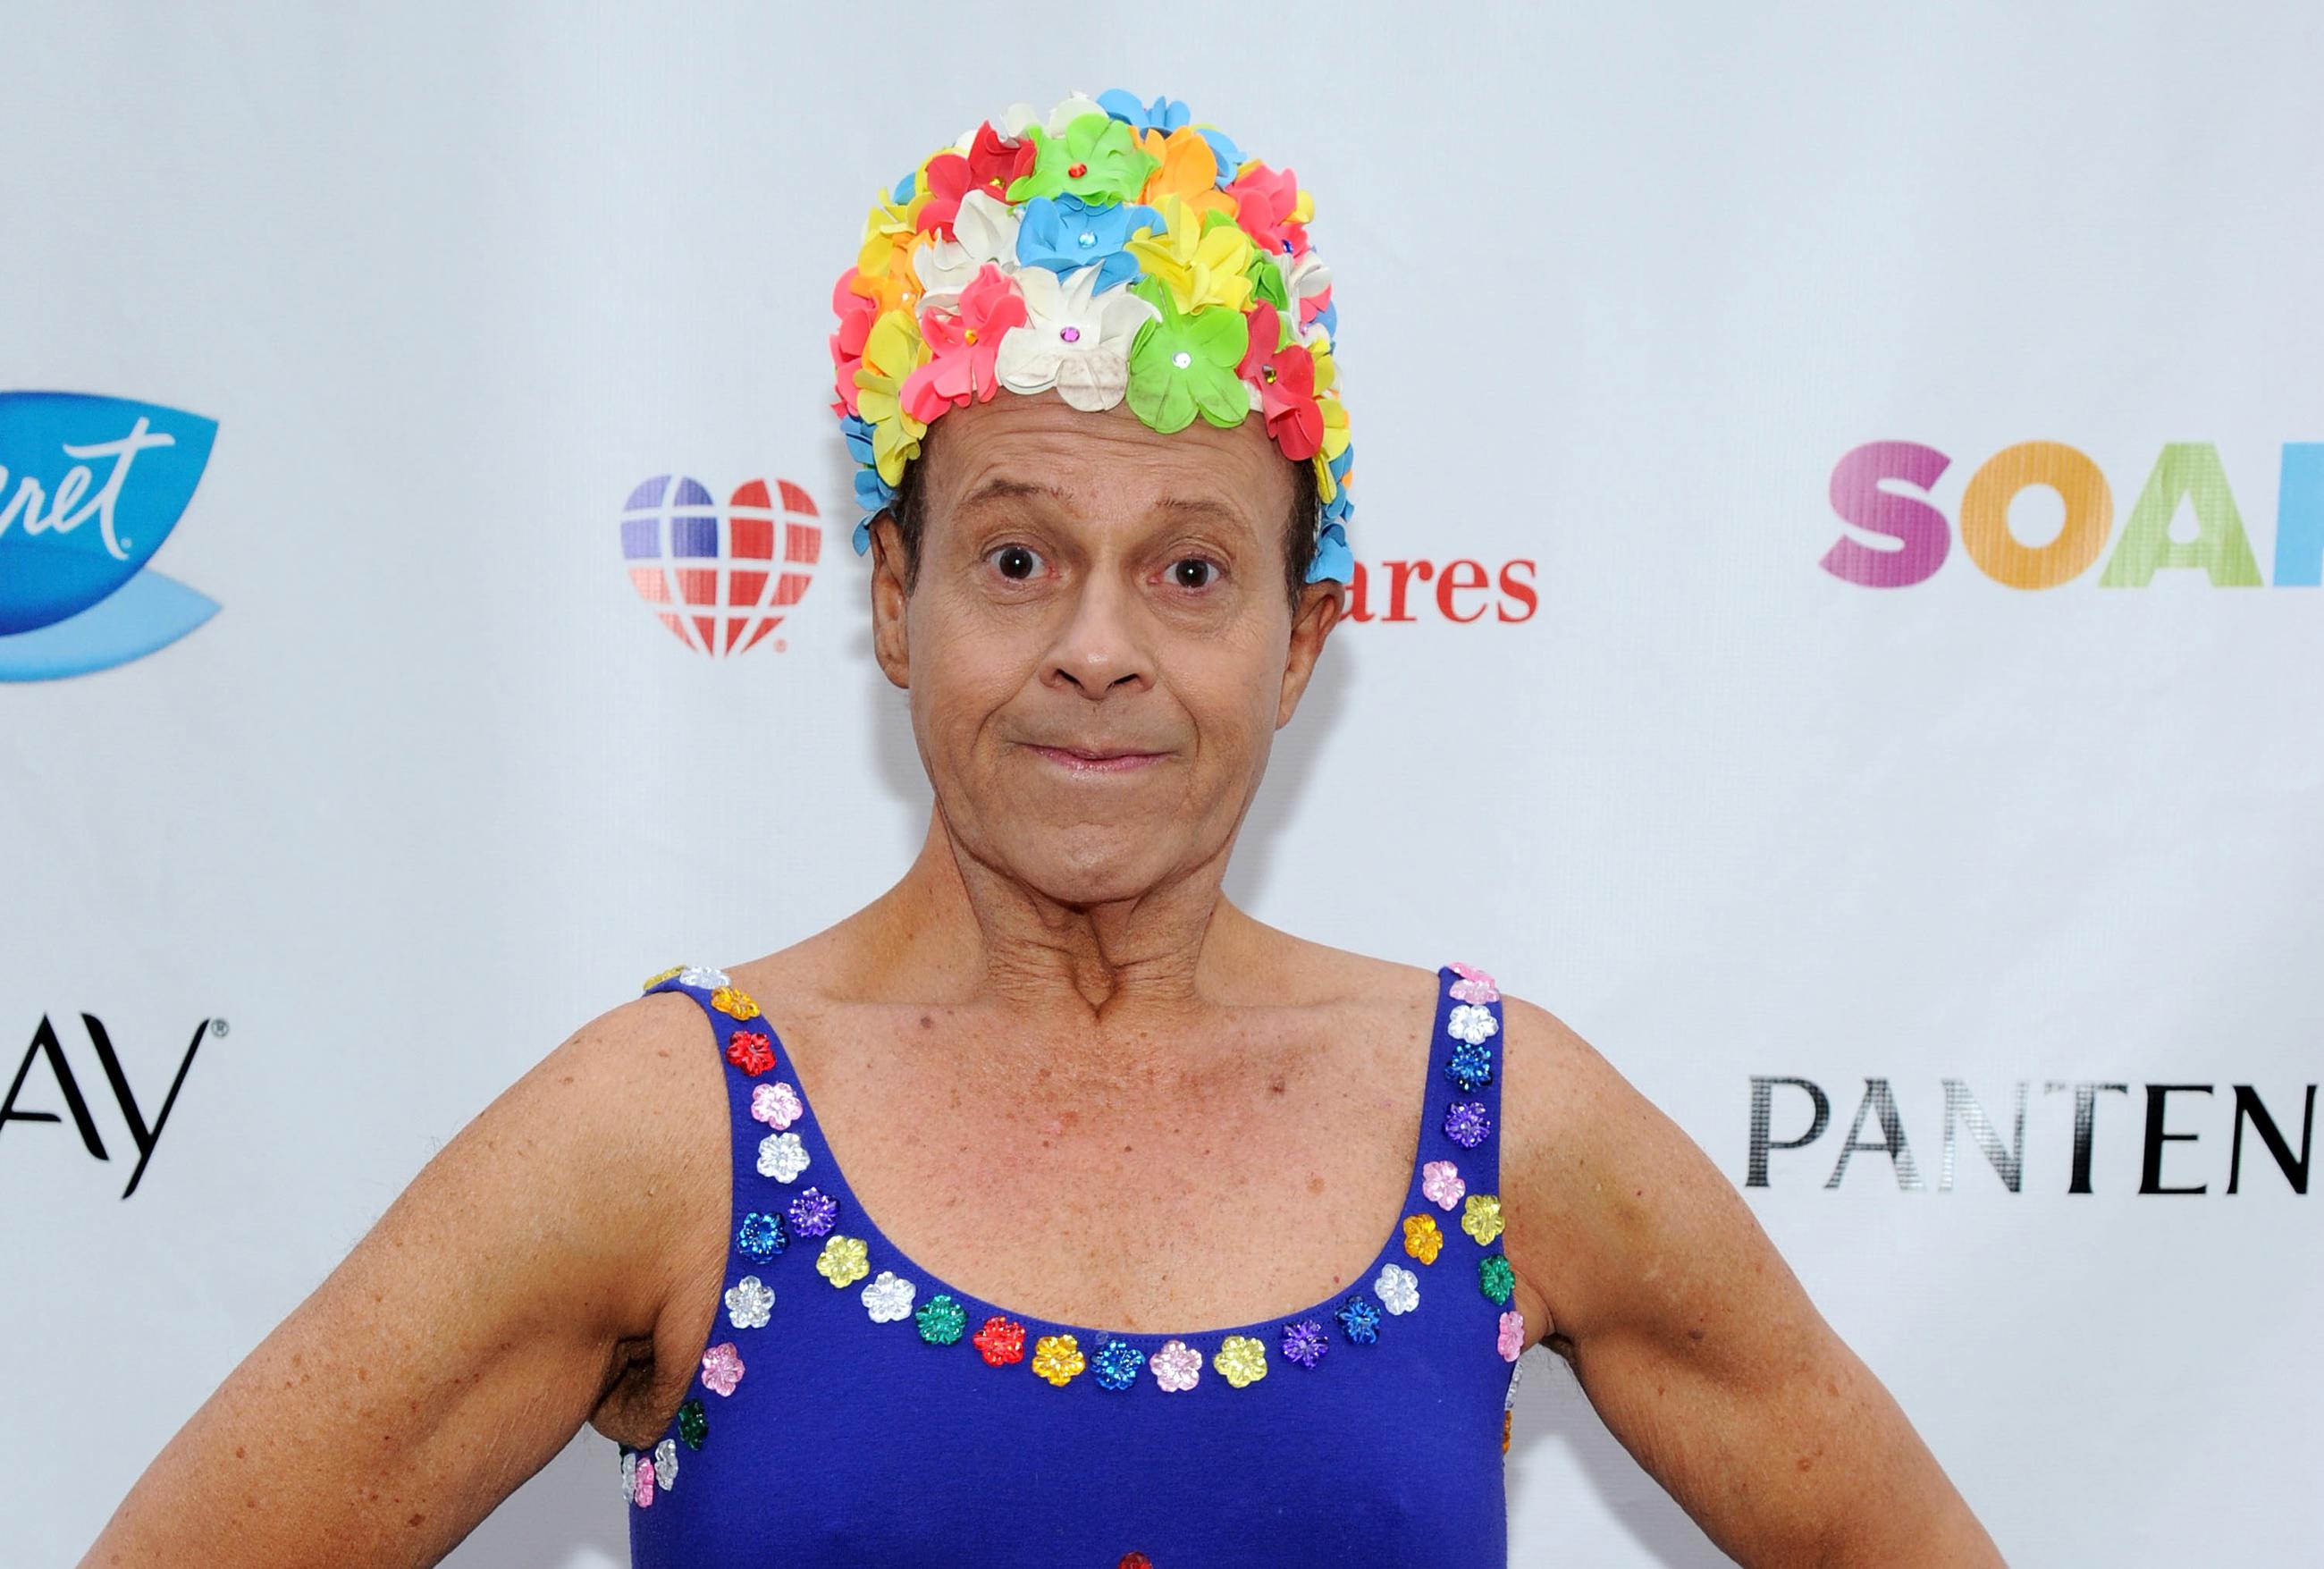 Richard Simmons Wants YOU to Tell Your Friends About Obamacare.